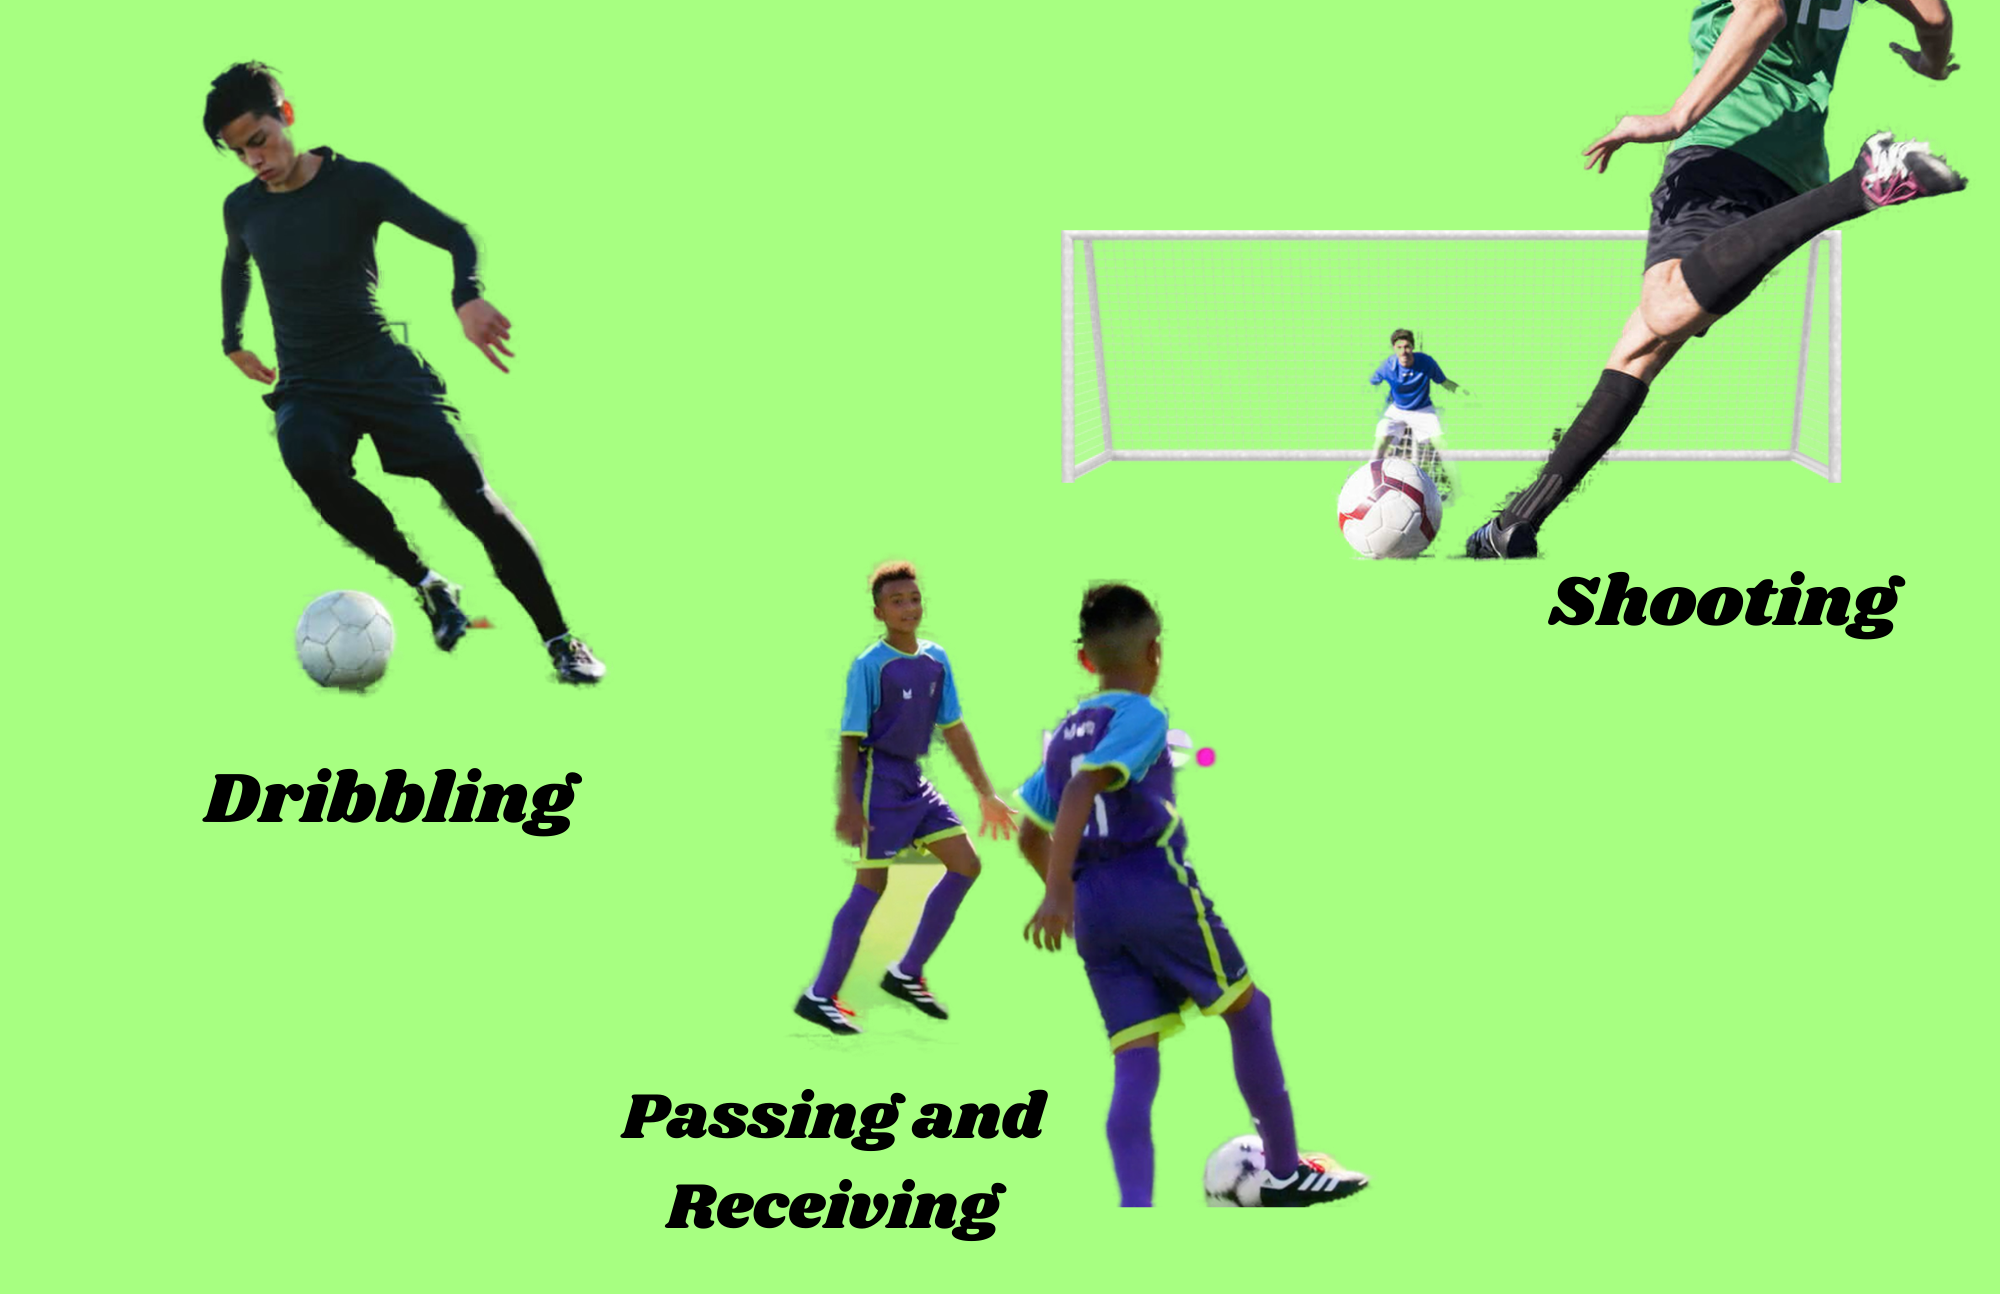 The three fundamental soccer skills which are dribbling, passing and receiving, and shooting